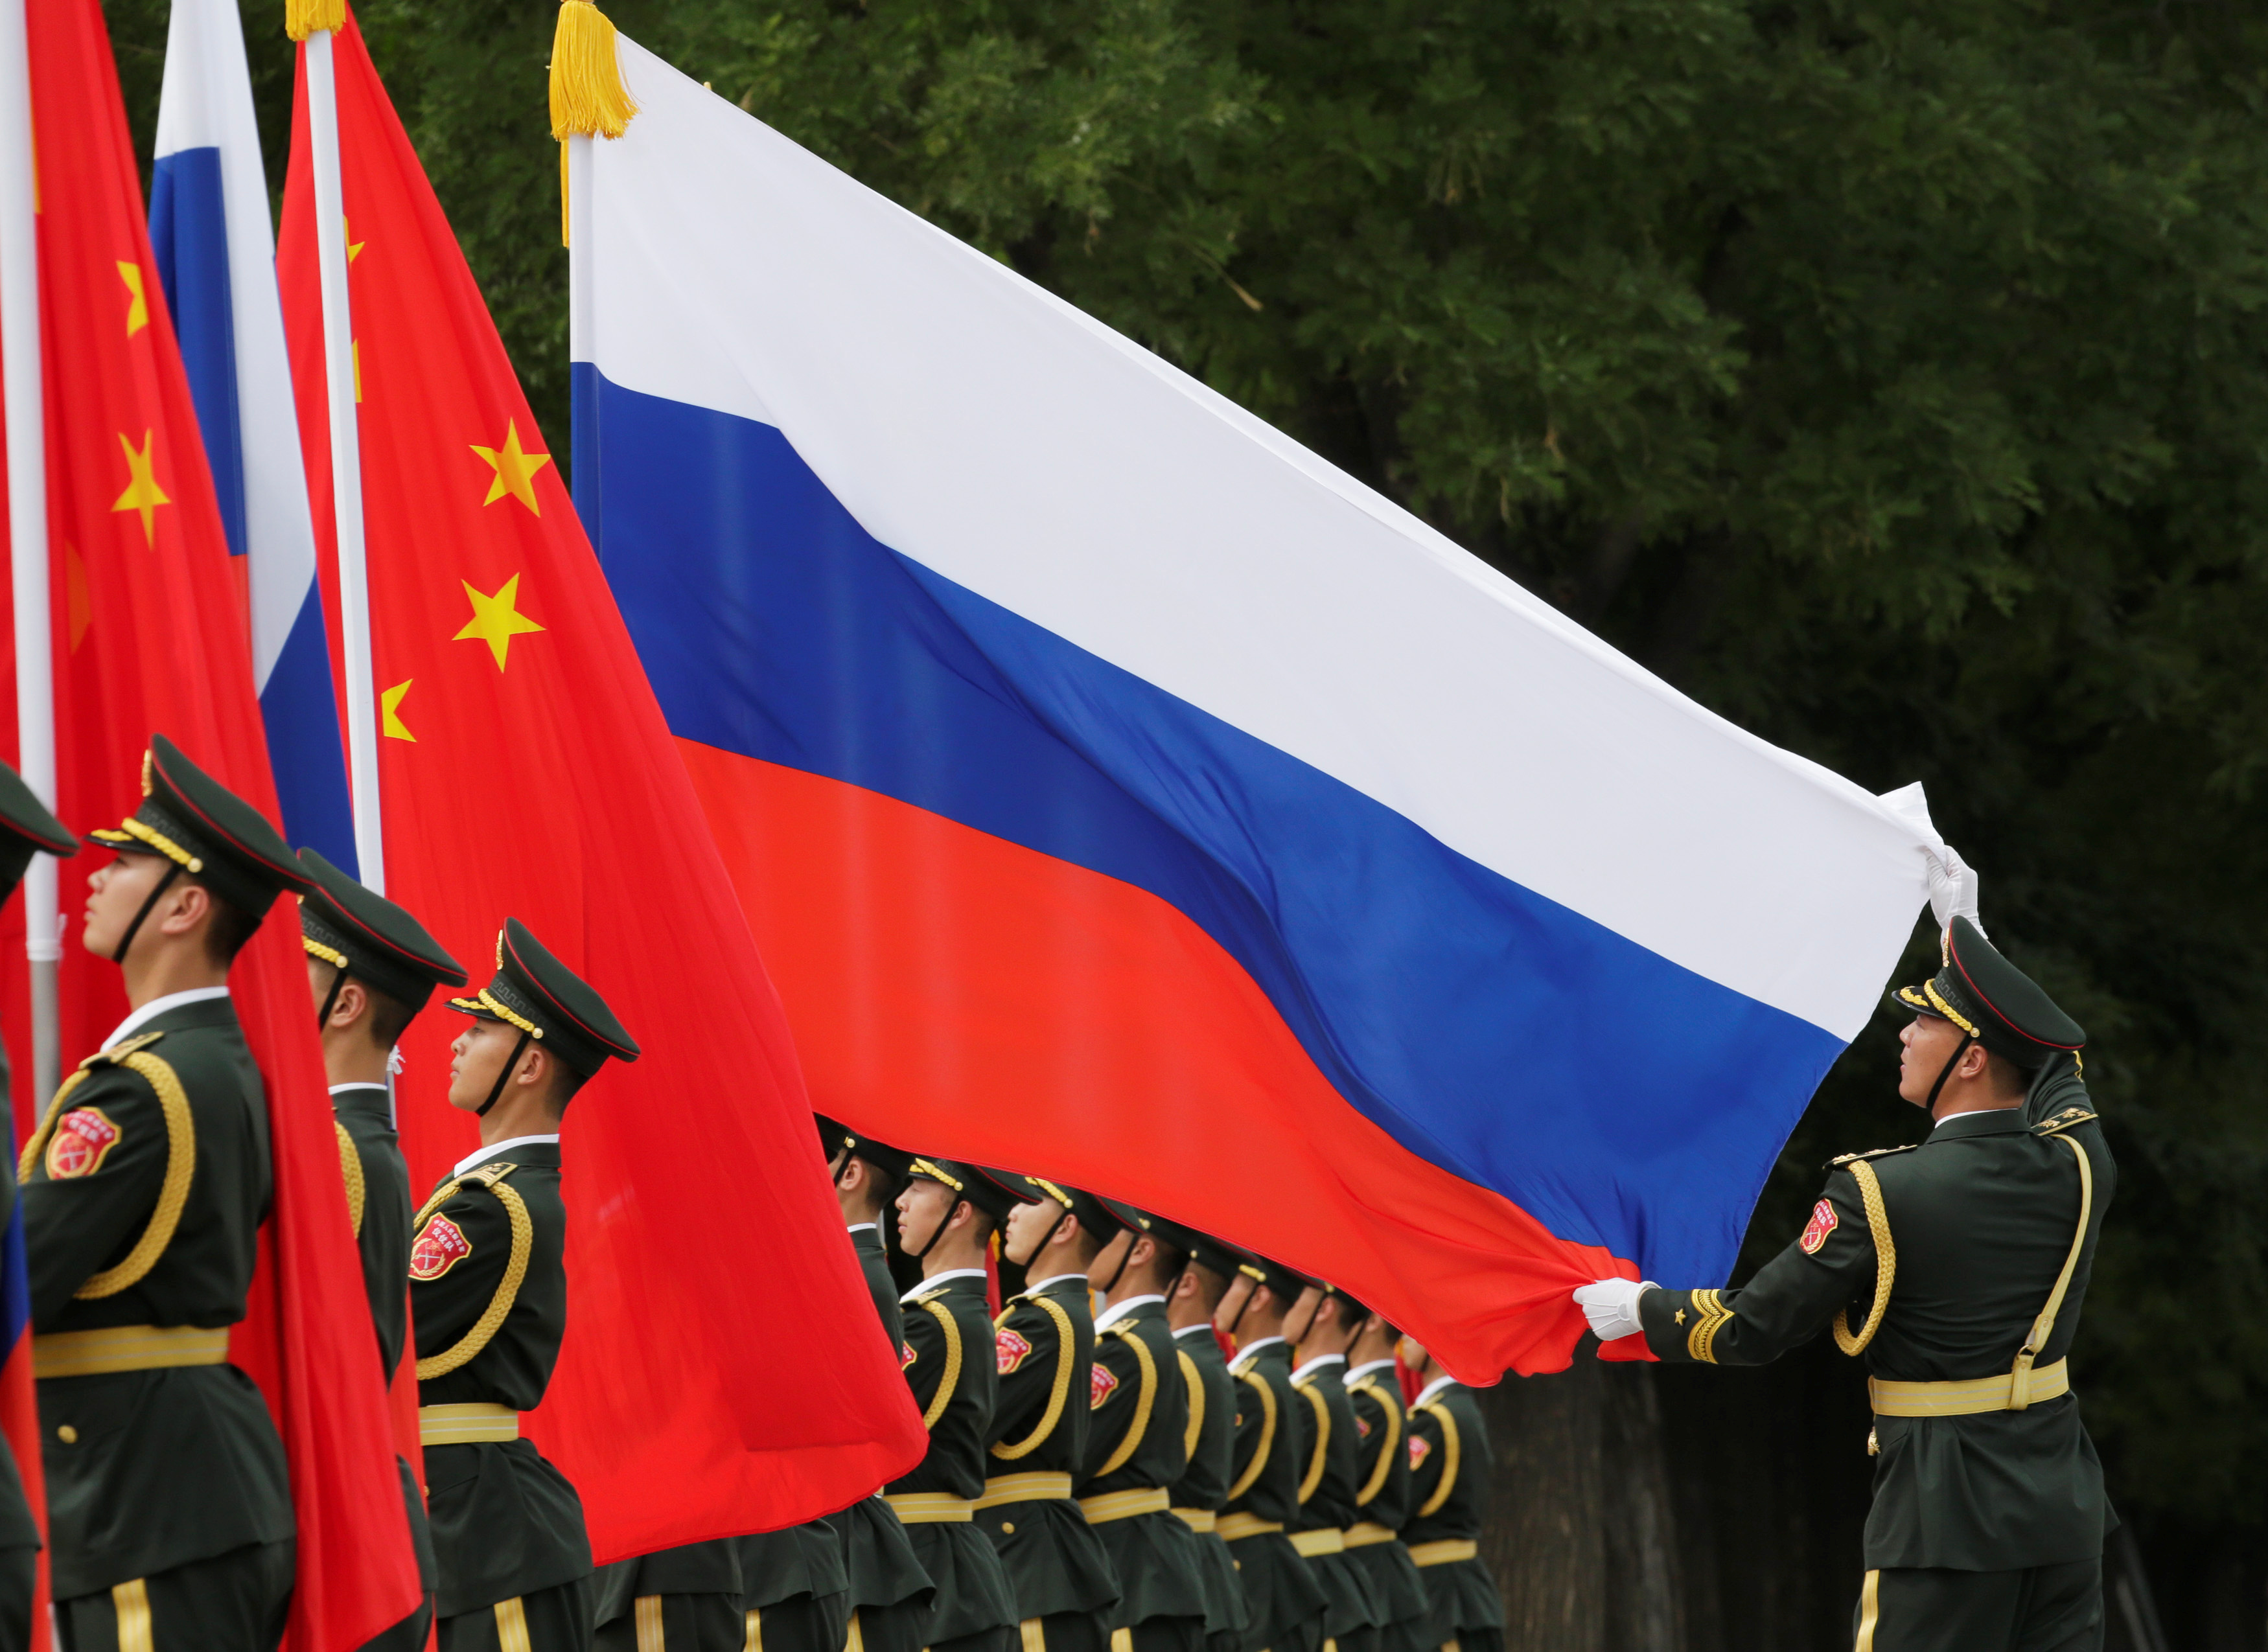 A military officer adjusts a Russian flag ahead of a welcome ceremony in Beijing